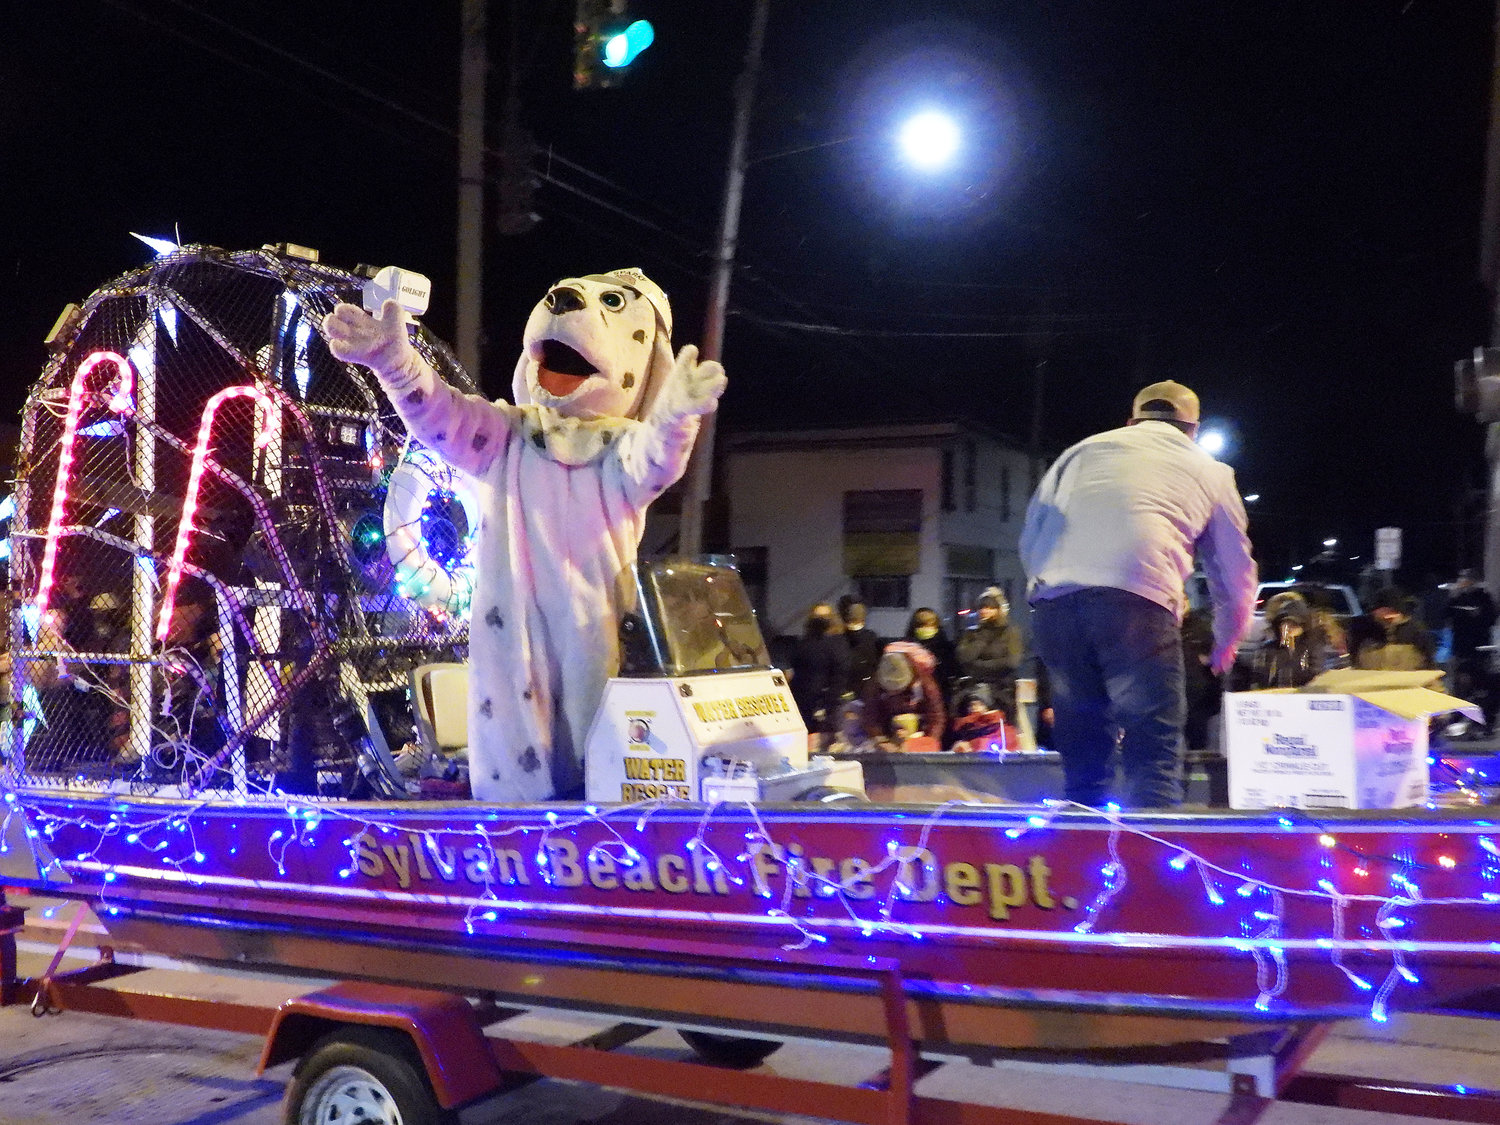 A float makes its way down the parade route in the 2021 Canastota Parade of Lights. Organizers say there is still time for participants to sign up for the 2022 parade.